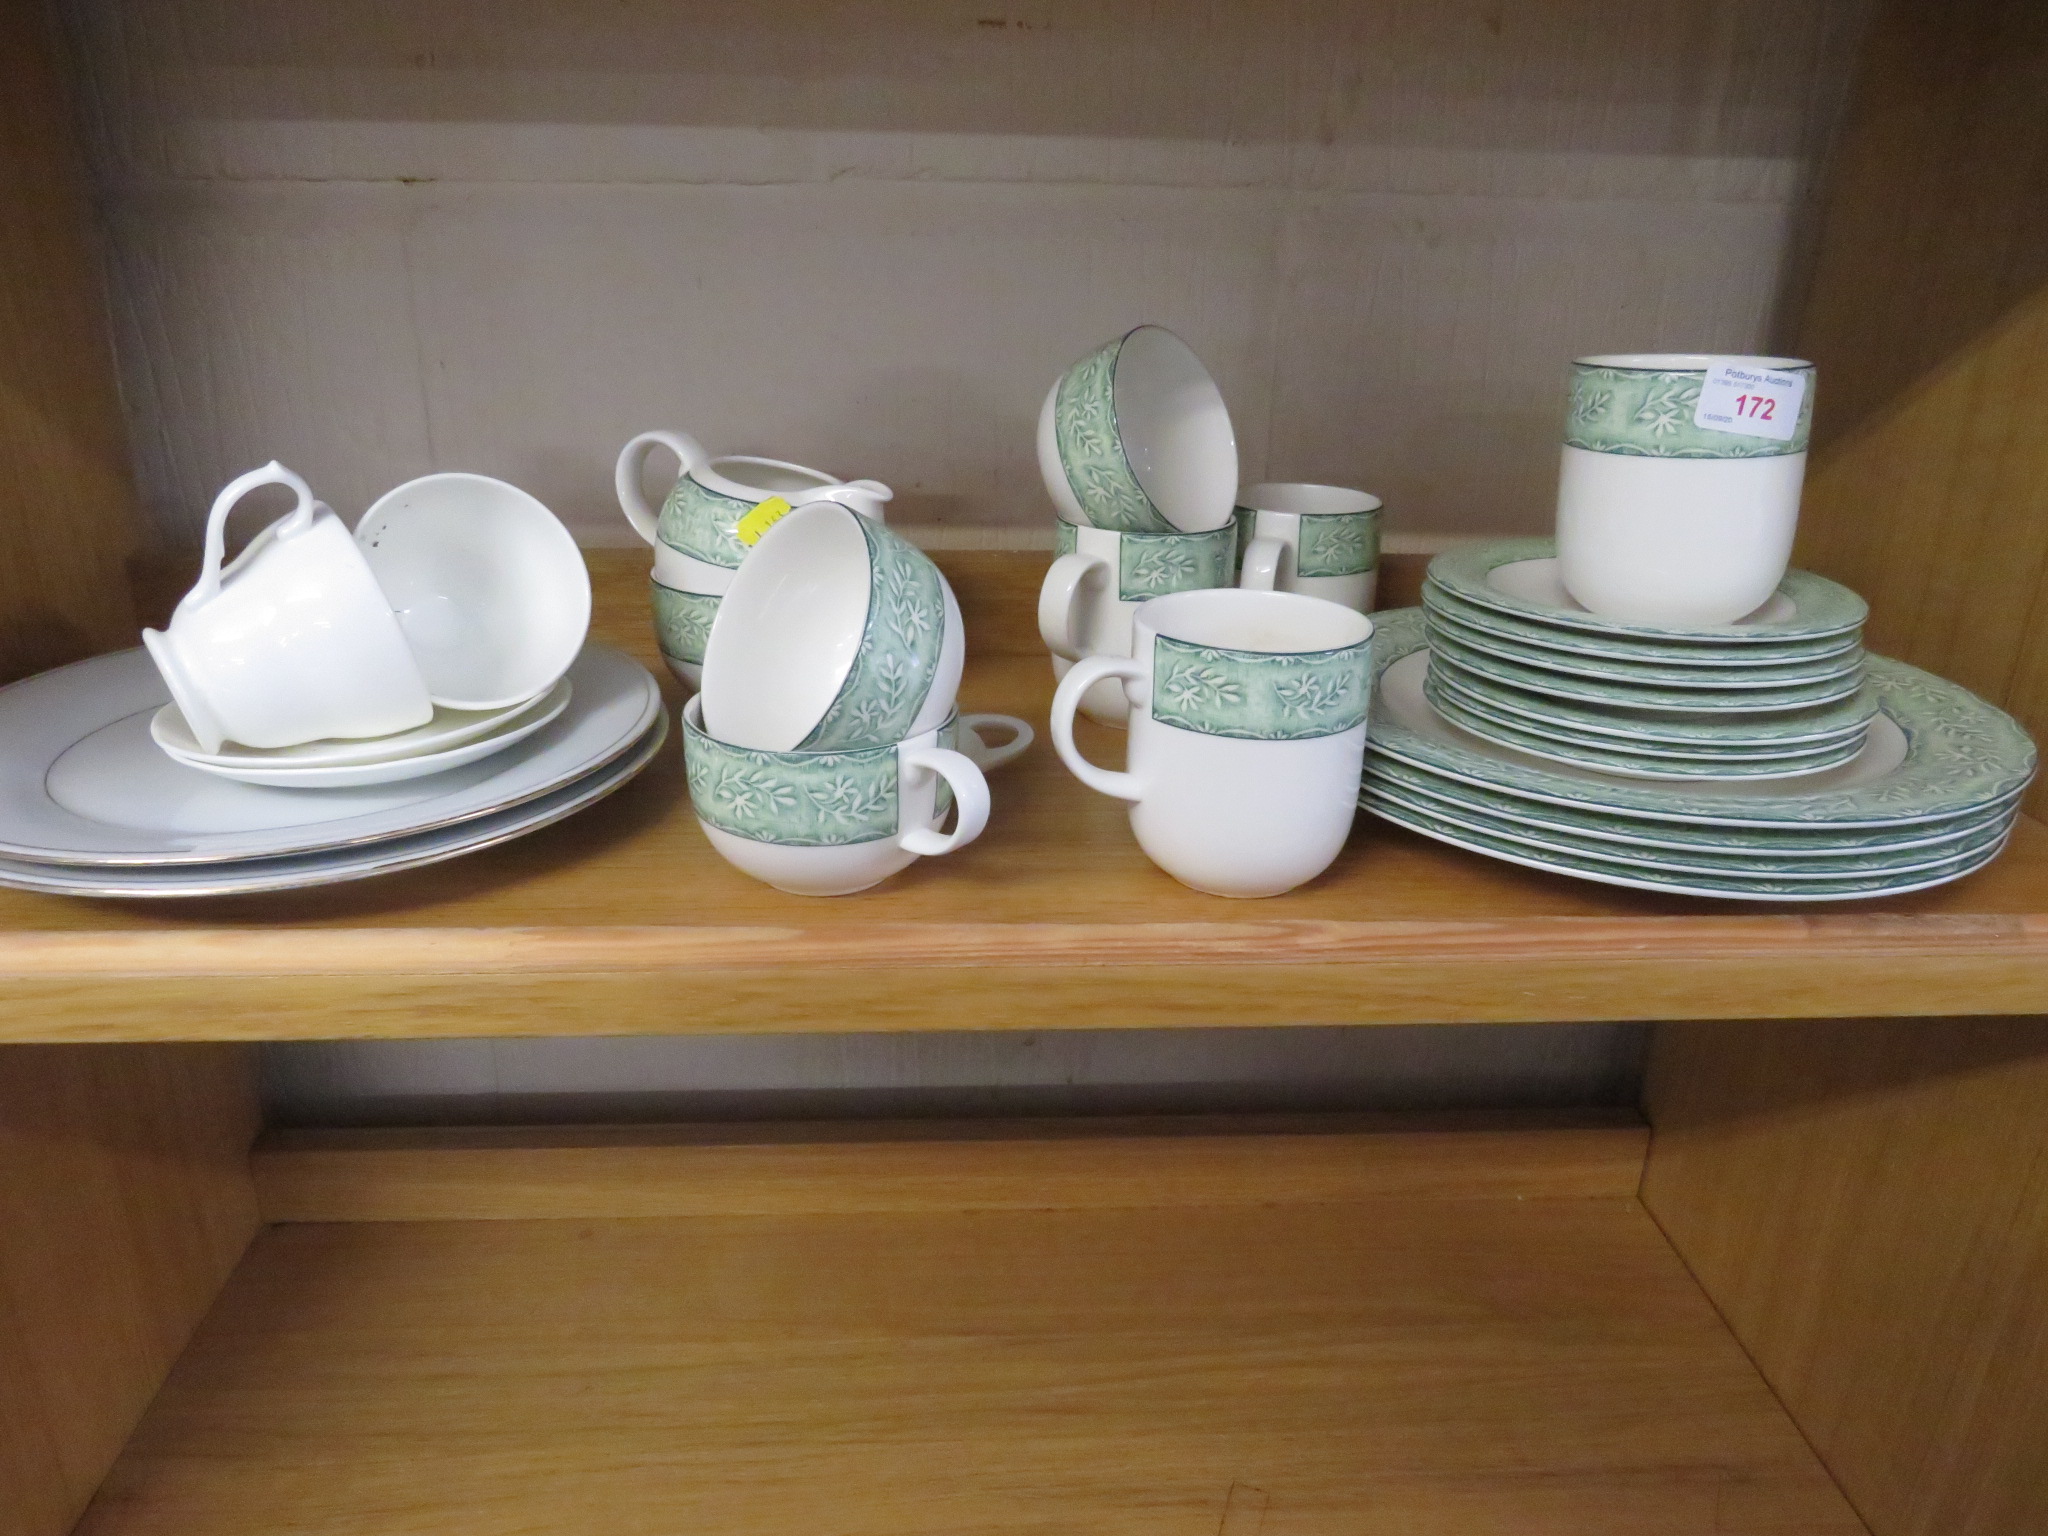 ONE SHELF OF EXPRESSIONS DINING CHINA